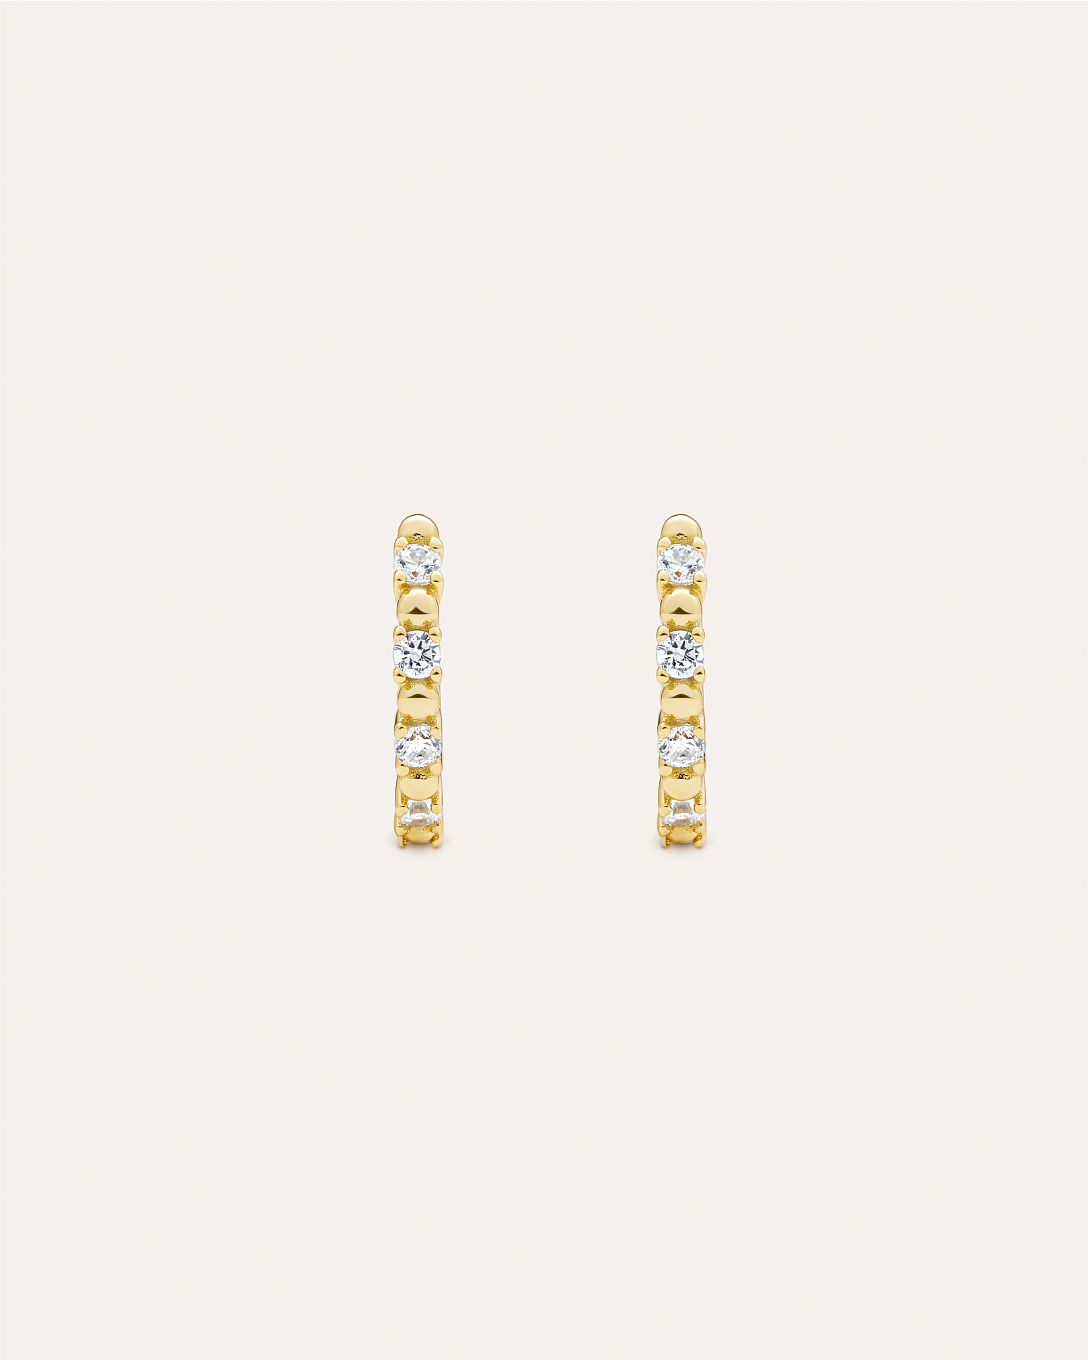 14KT Gold Plated earring with Cubic Zirconia